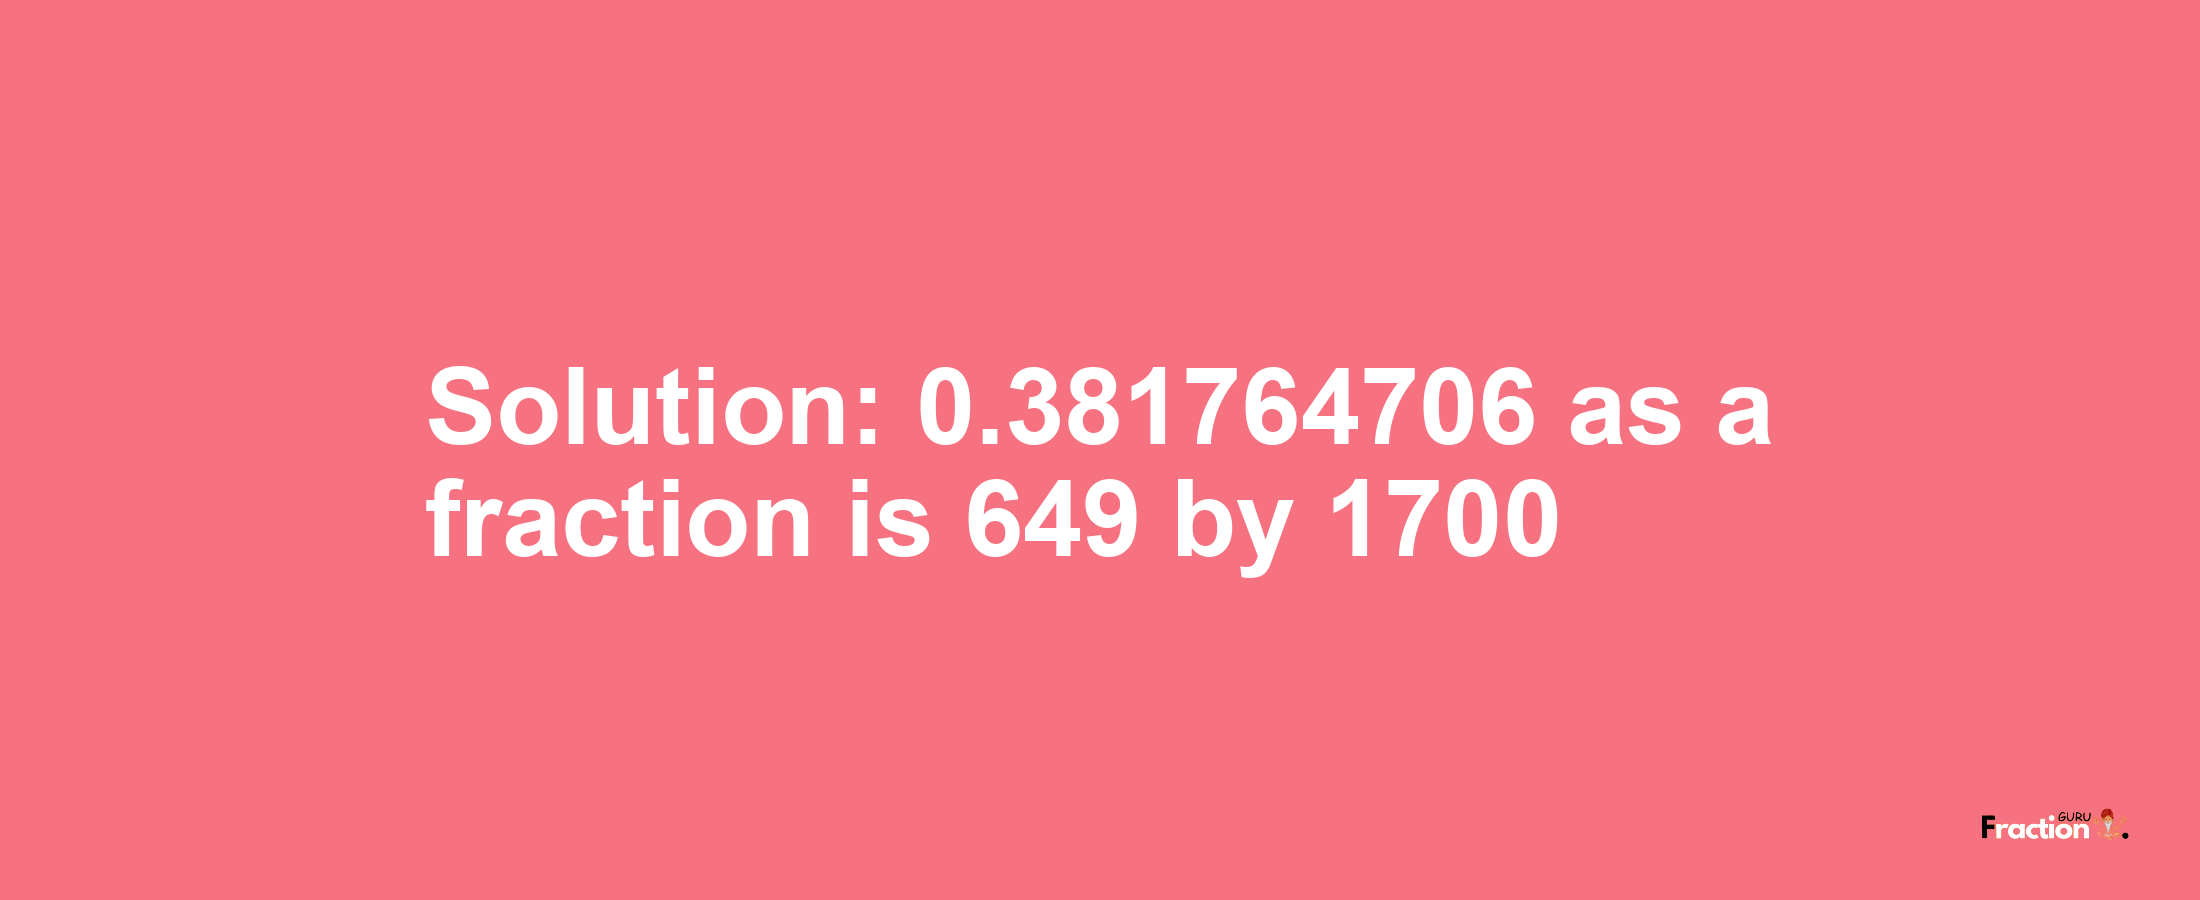 Solution:0.381764706 as a fraction is 649/1700